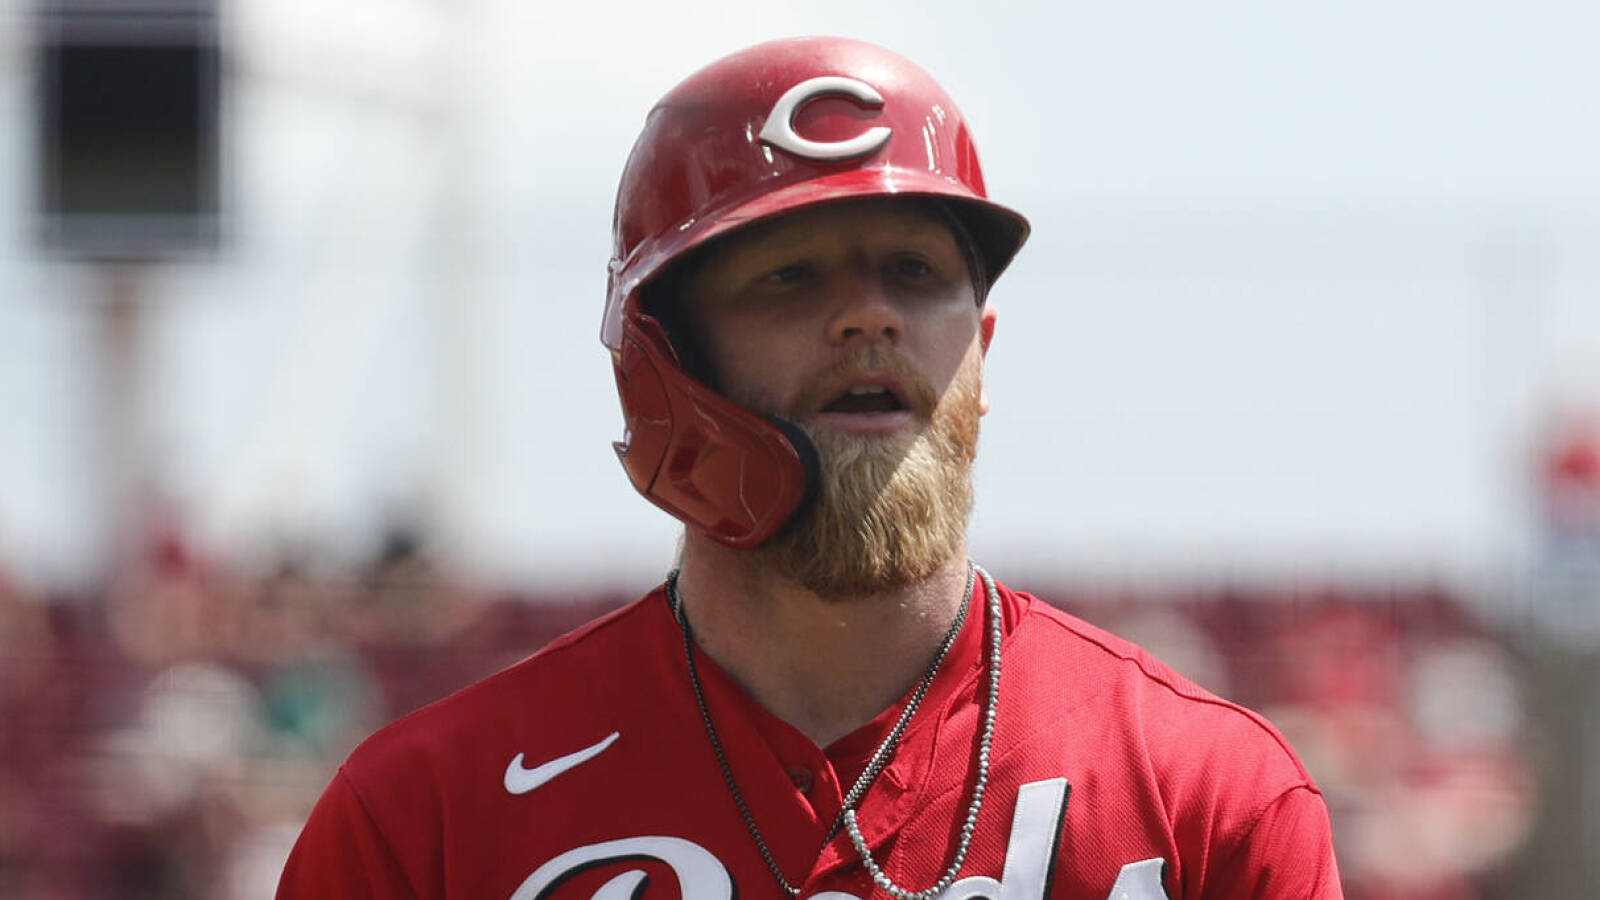 Reds place outfielder having career year on injured list